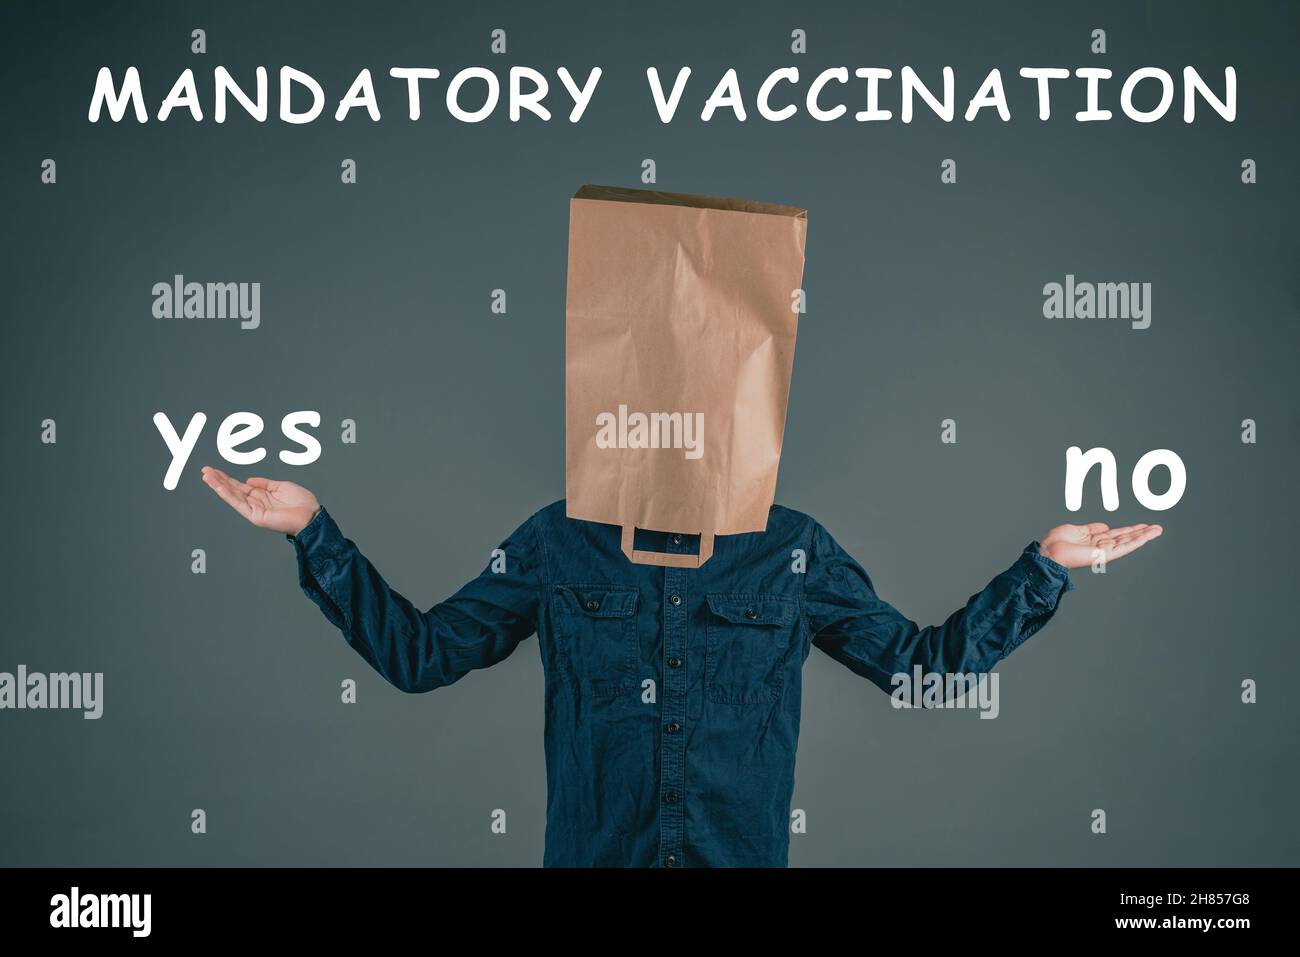 Mandatory vaccination, yes or no, man with paper bag on his head, making a decision, covid-19, pandemic Stock Photo